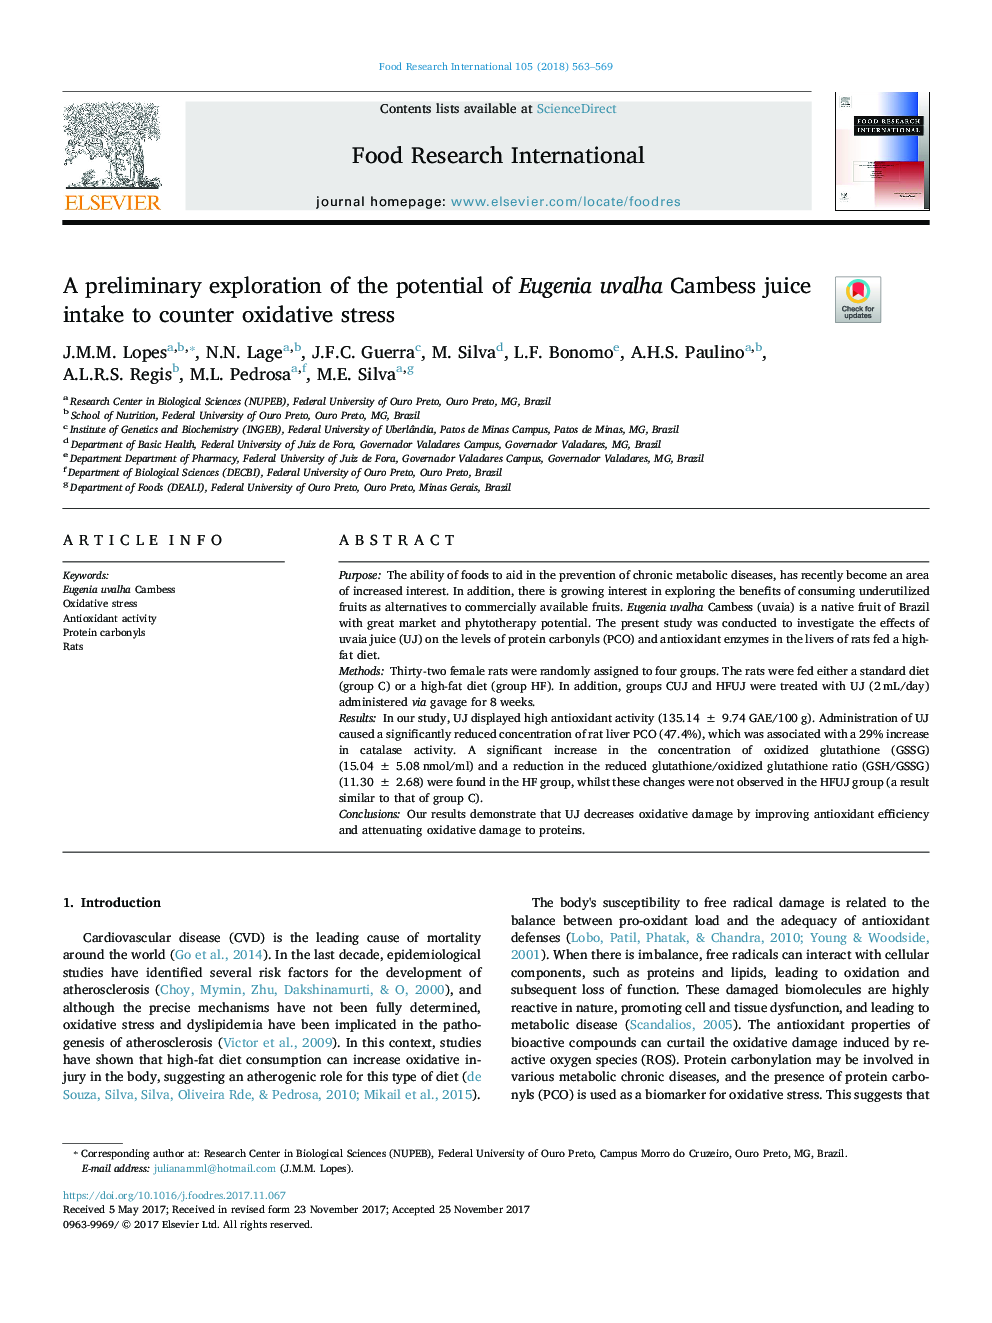 A preliminary exploration of the potential of Eugenia uvalha Cambess juice intake to counter oxidative stress